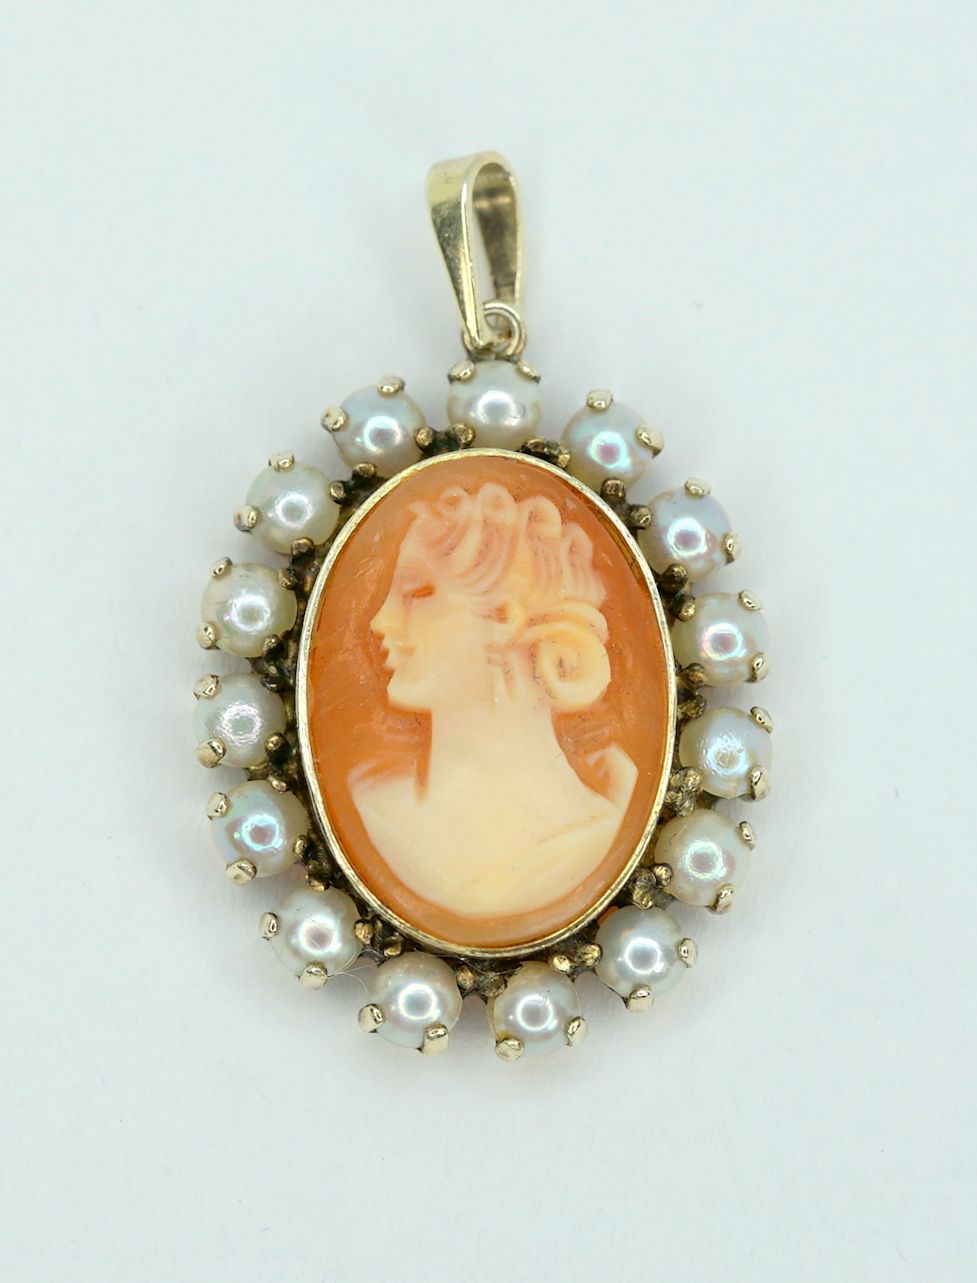 Schöne Kamee einer Nymphe Coral cameo worked as a pendant, carved in detail with&hellip;